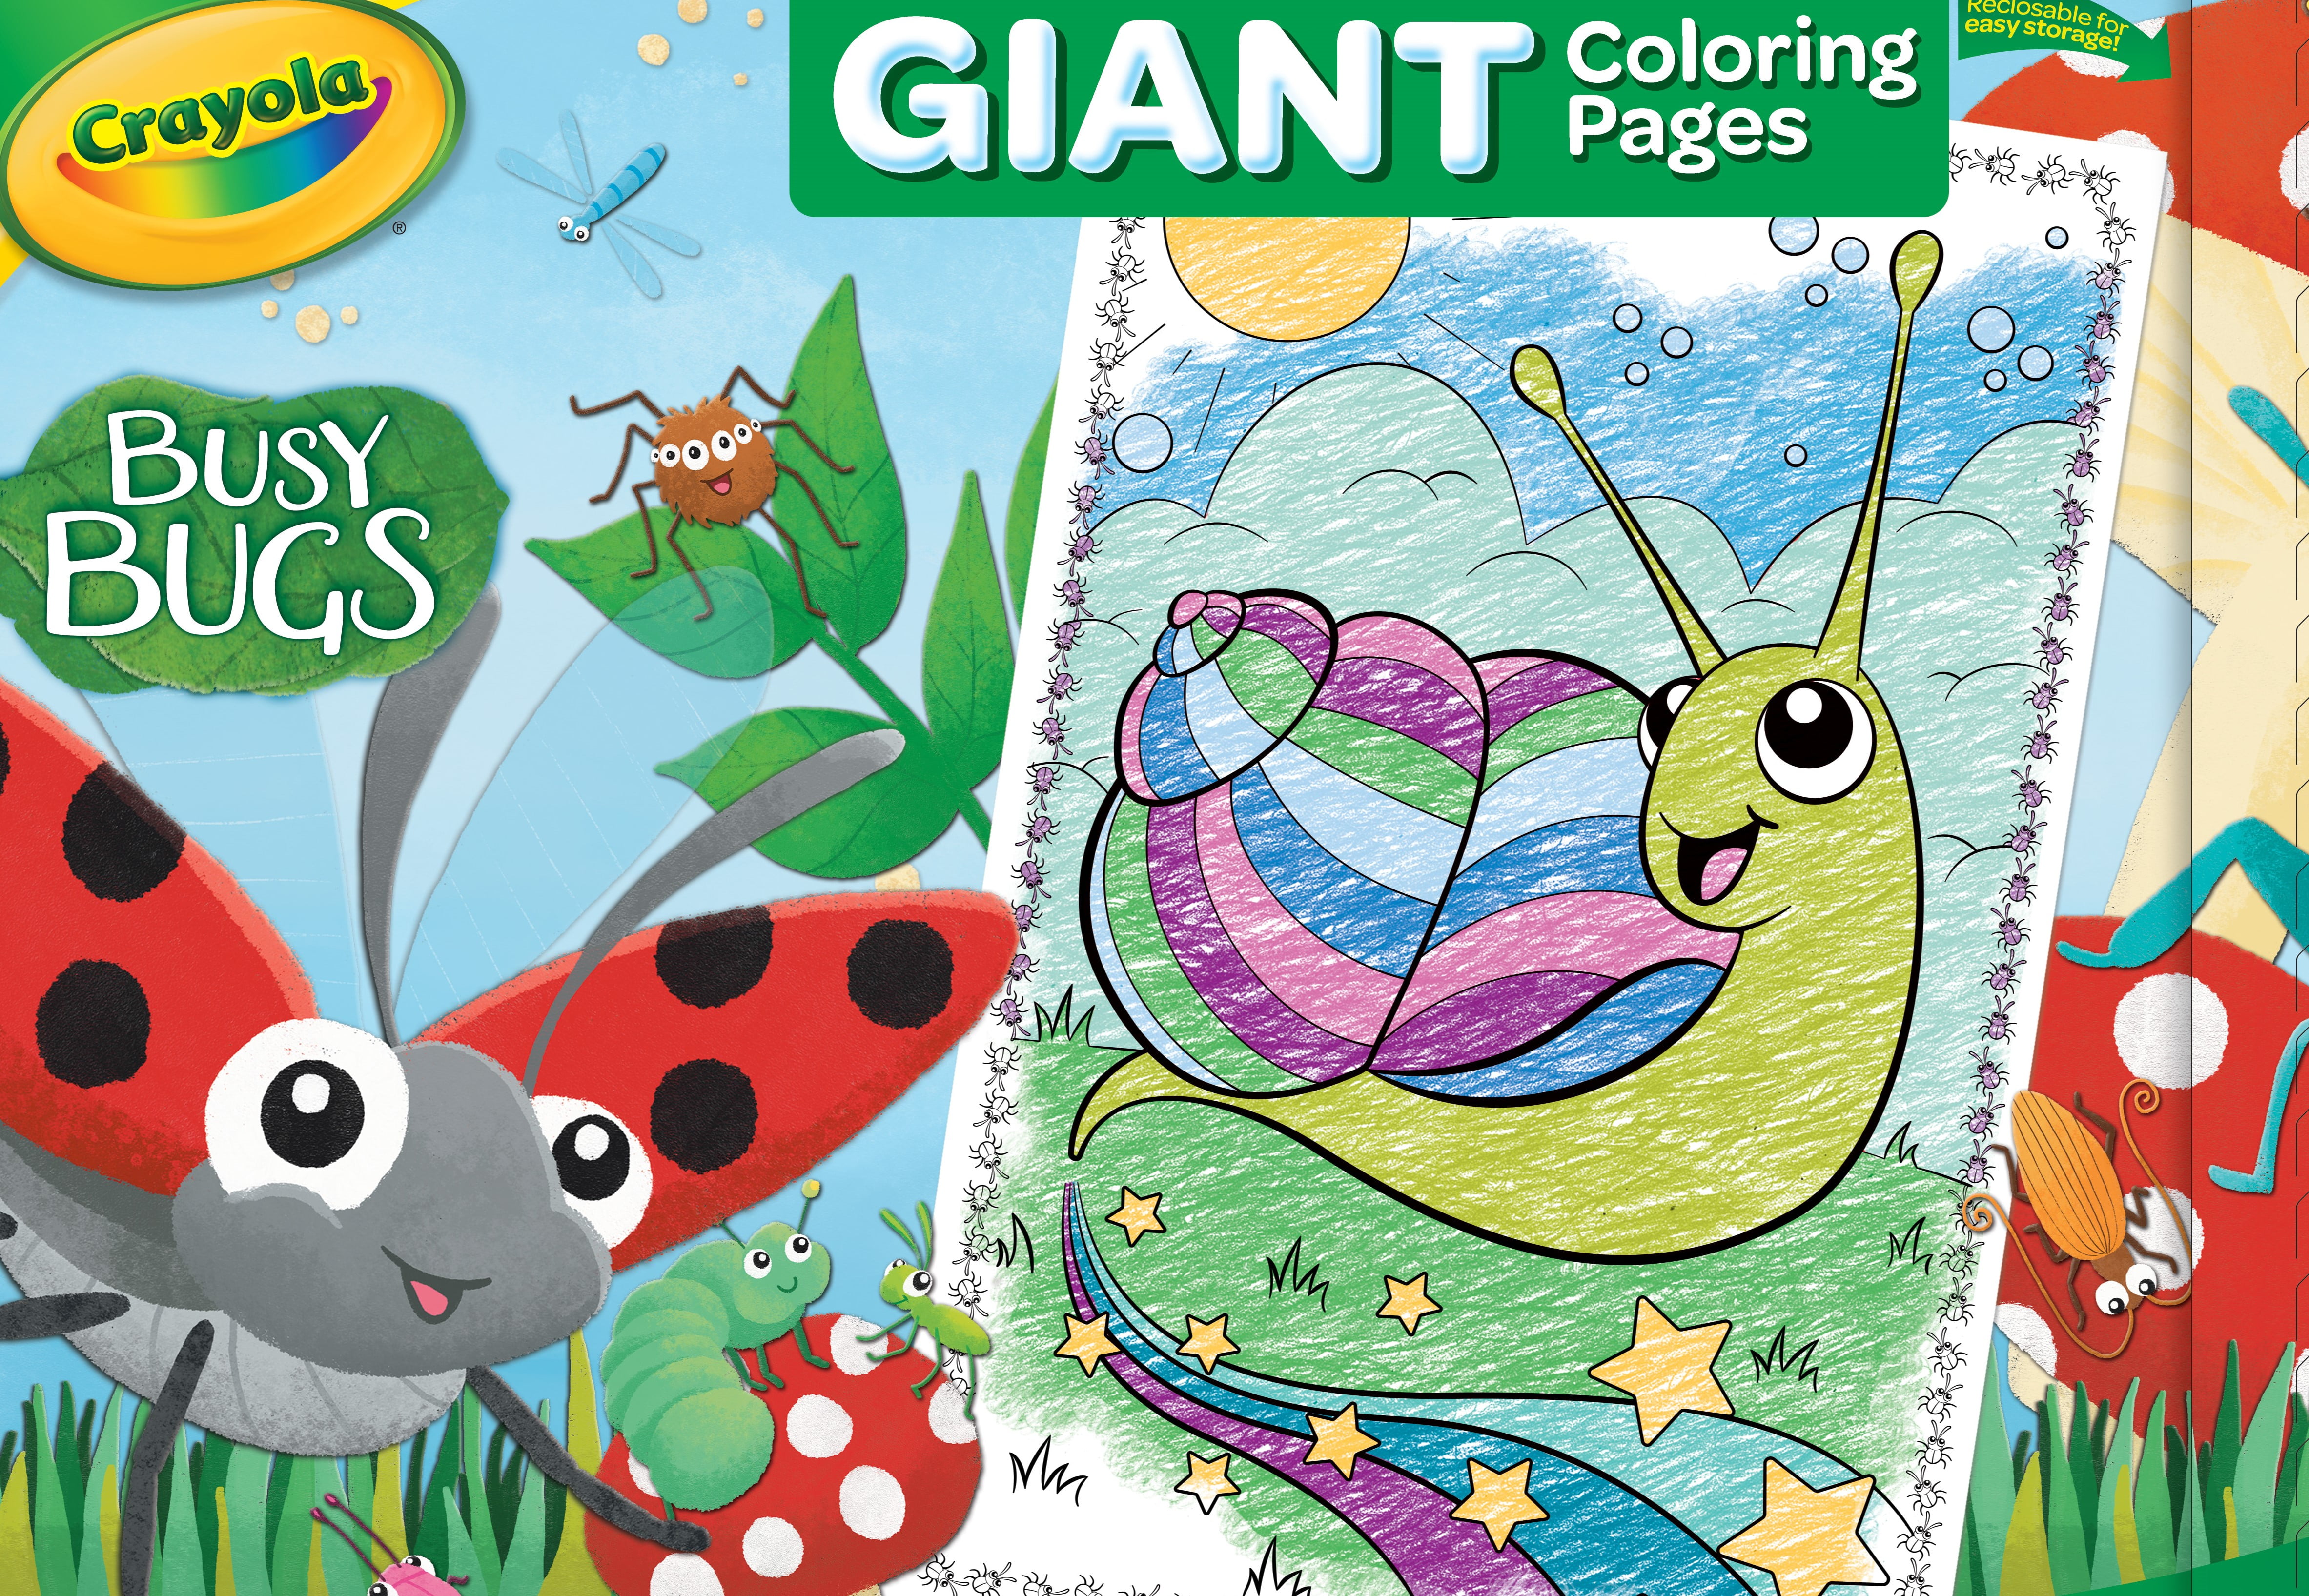 Crayola Giant Coloring Books Featuring Busy Bugs, 20 Pages, Child